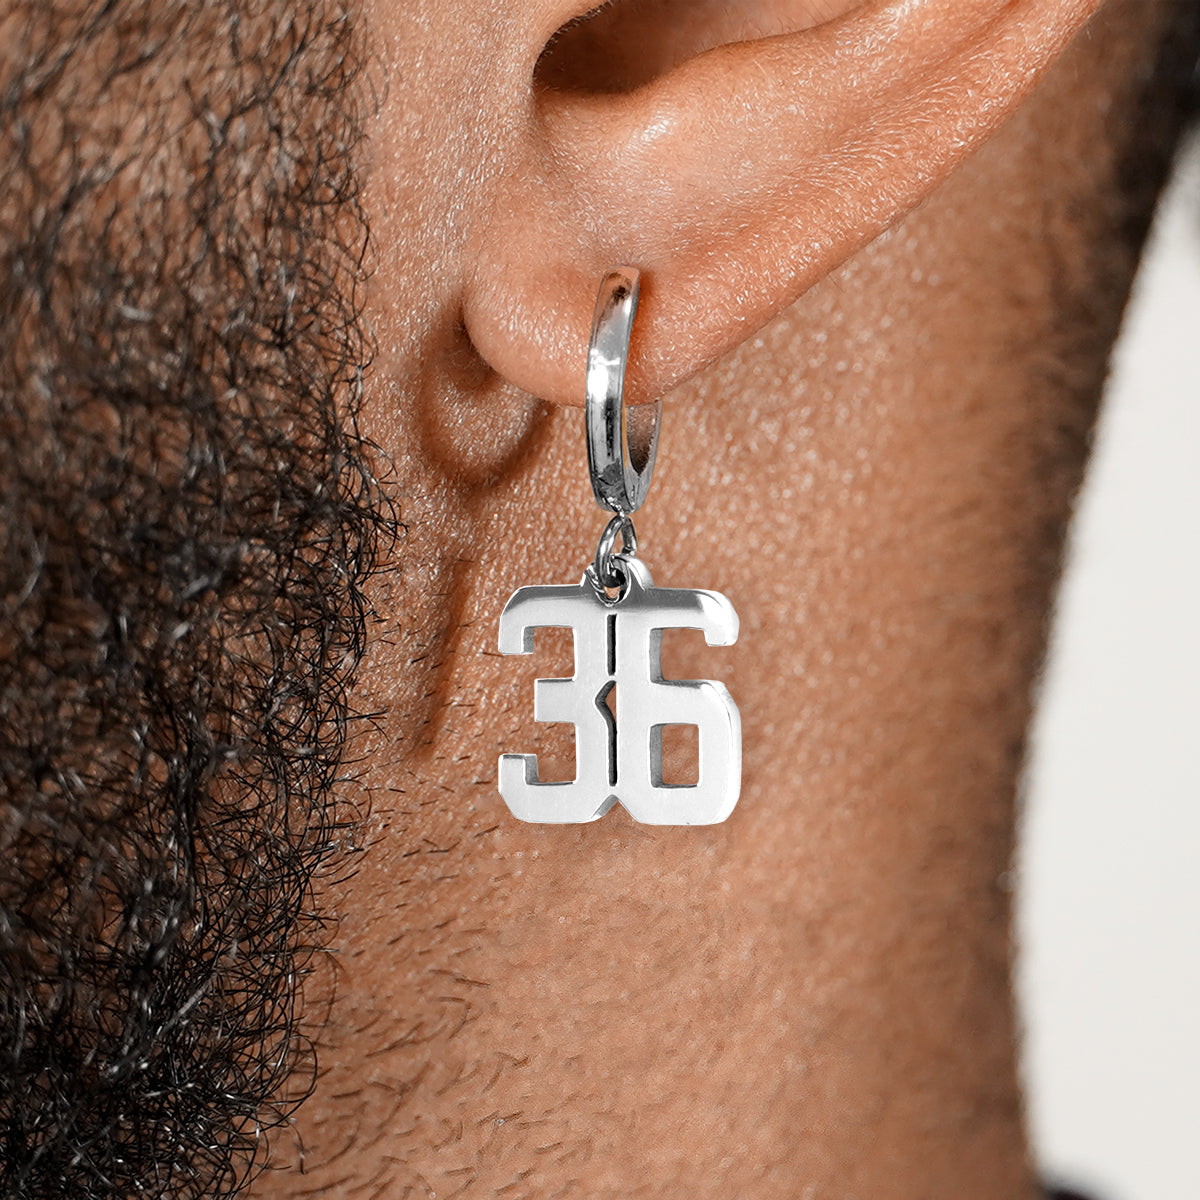 36 Number Earring - Stainless Steel